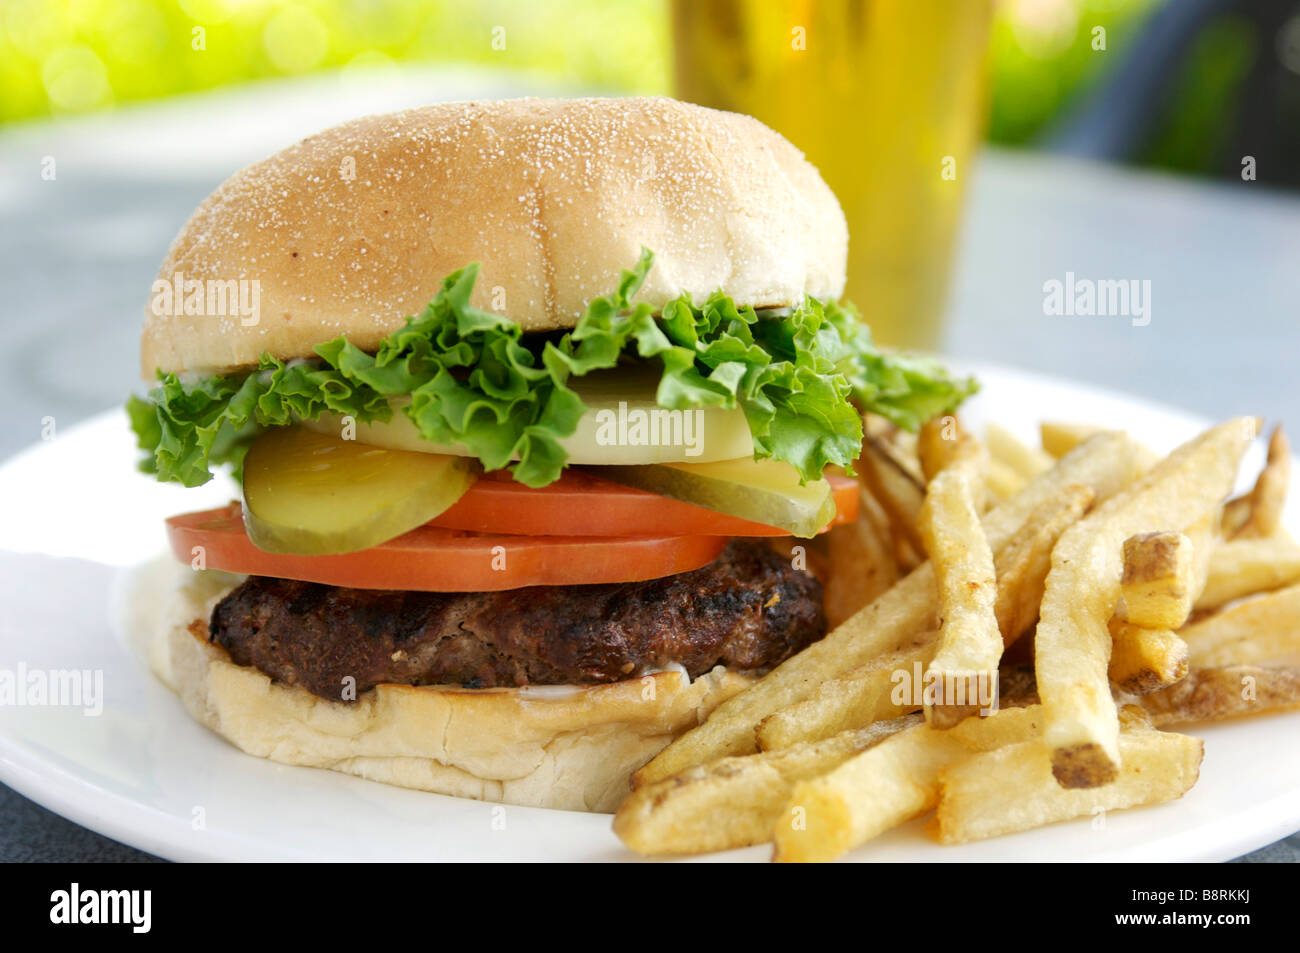 Hamburger with fries.  Loaded burger with lettuce, tomato, pickle, and a glass of beer. Stock Photo